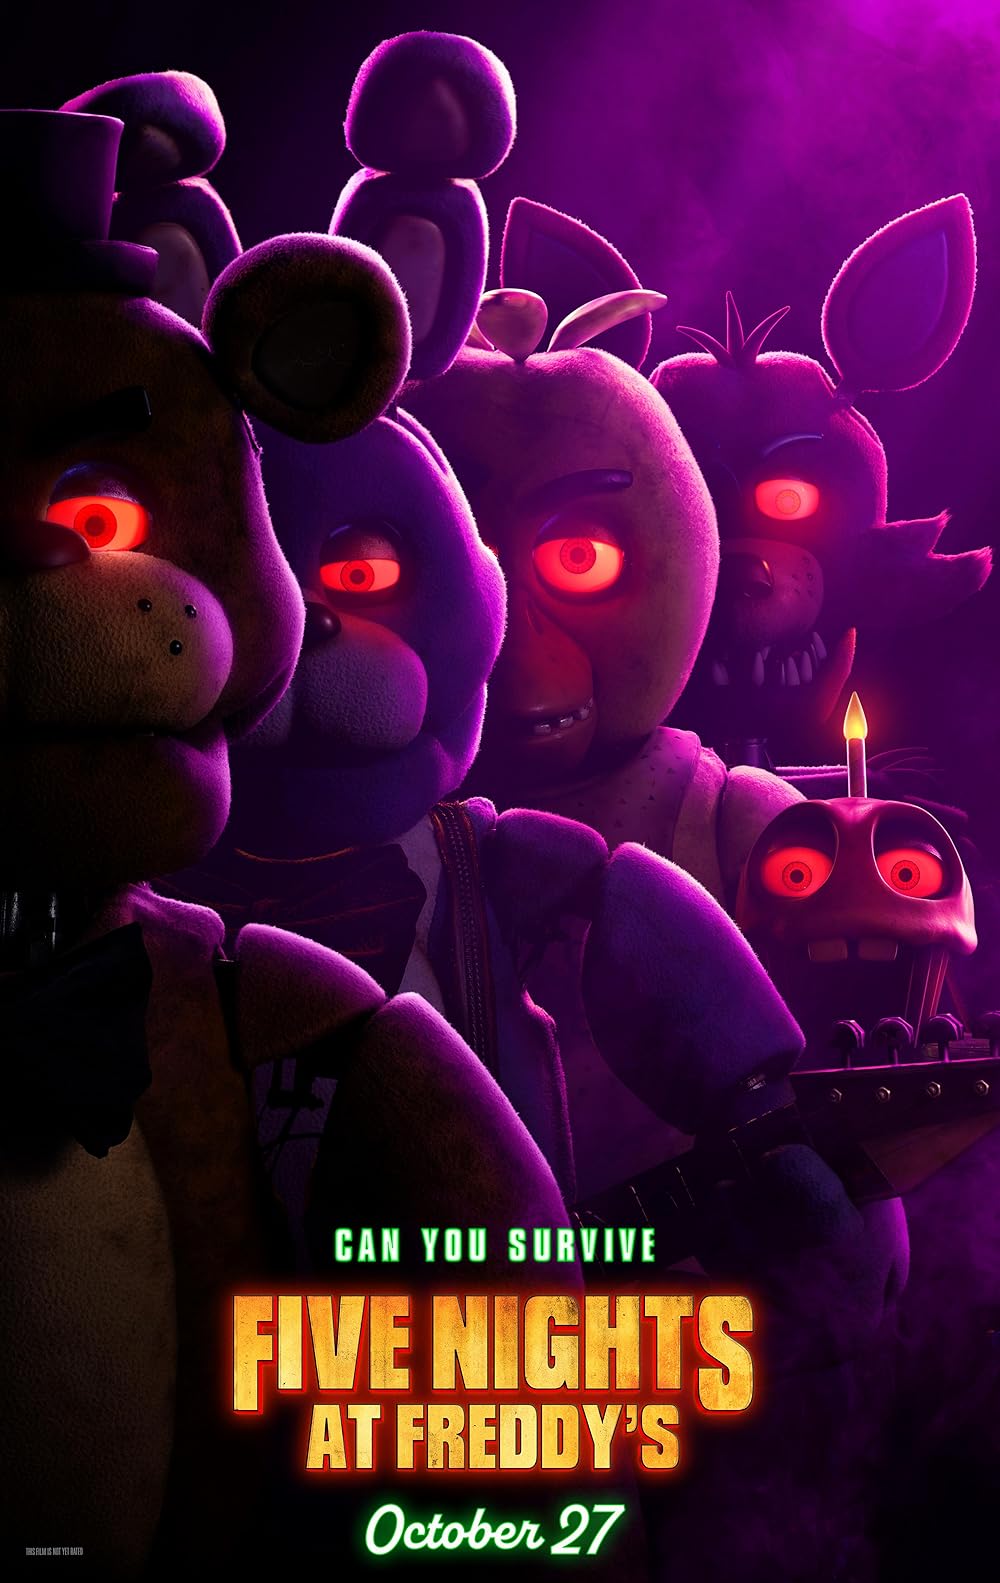 Popular video game 'Five Nights at Freddy's' comes to life in theaters